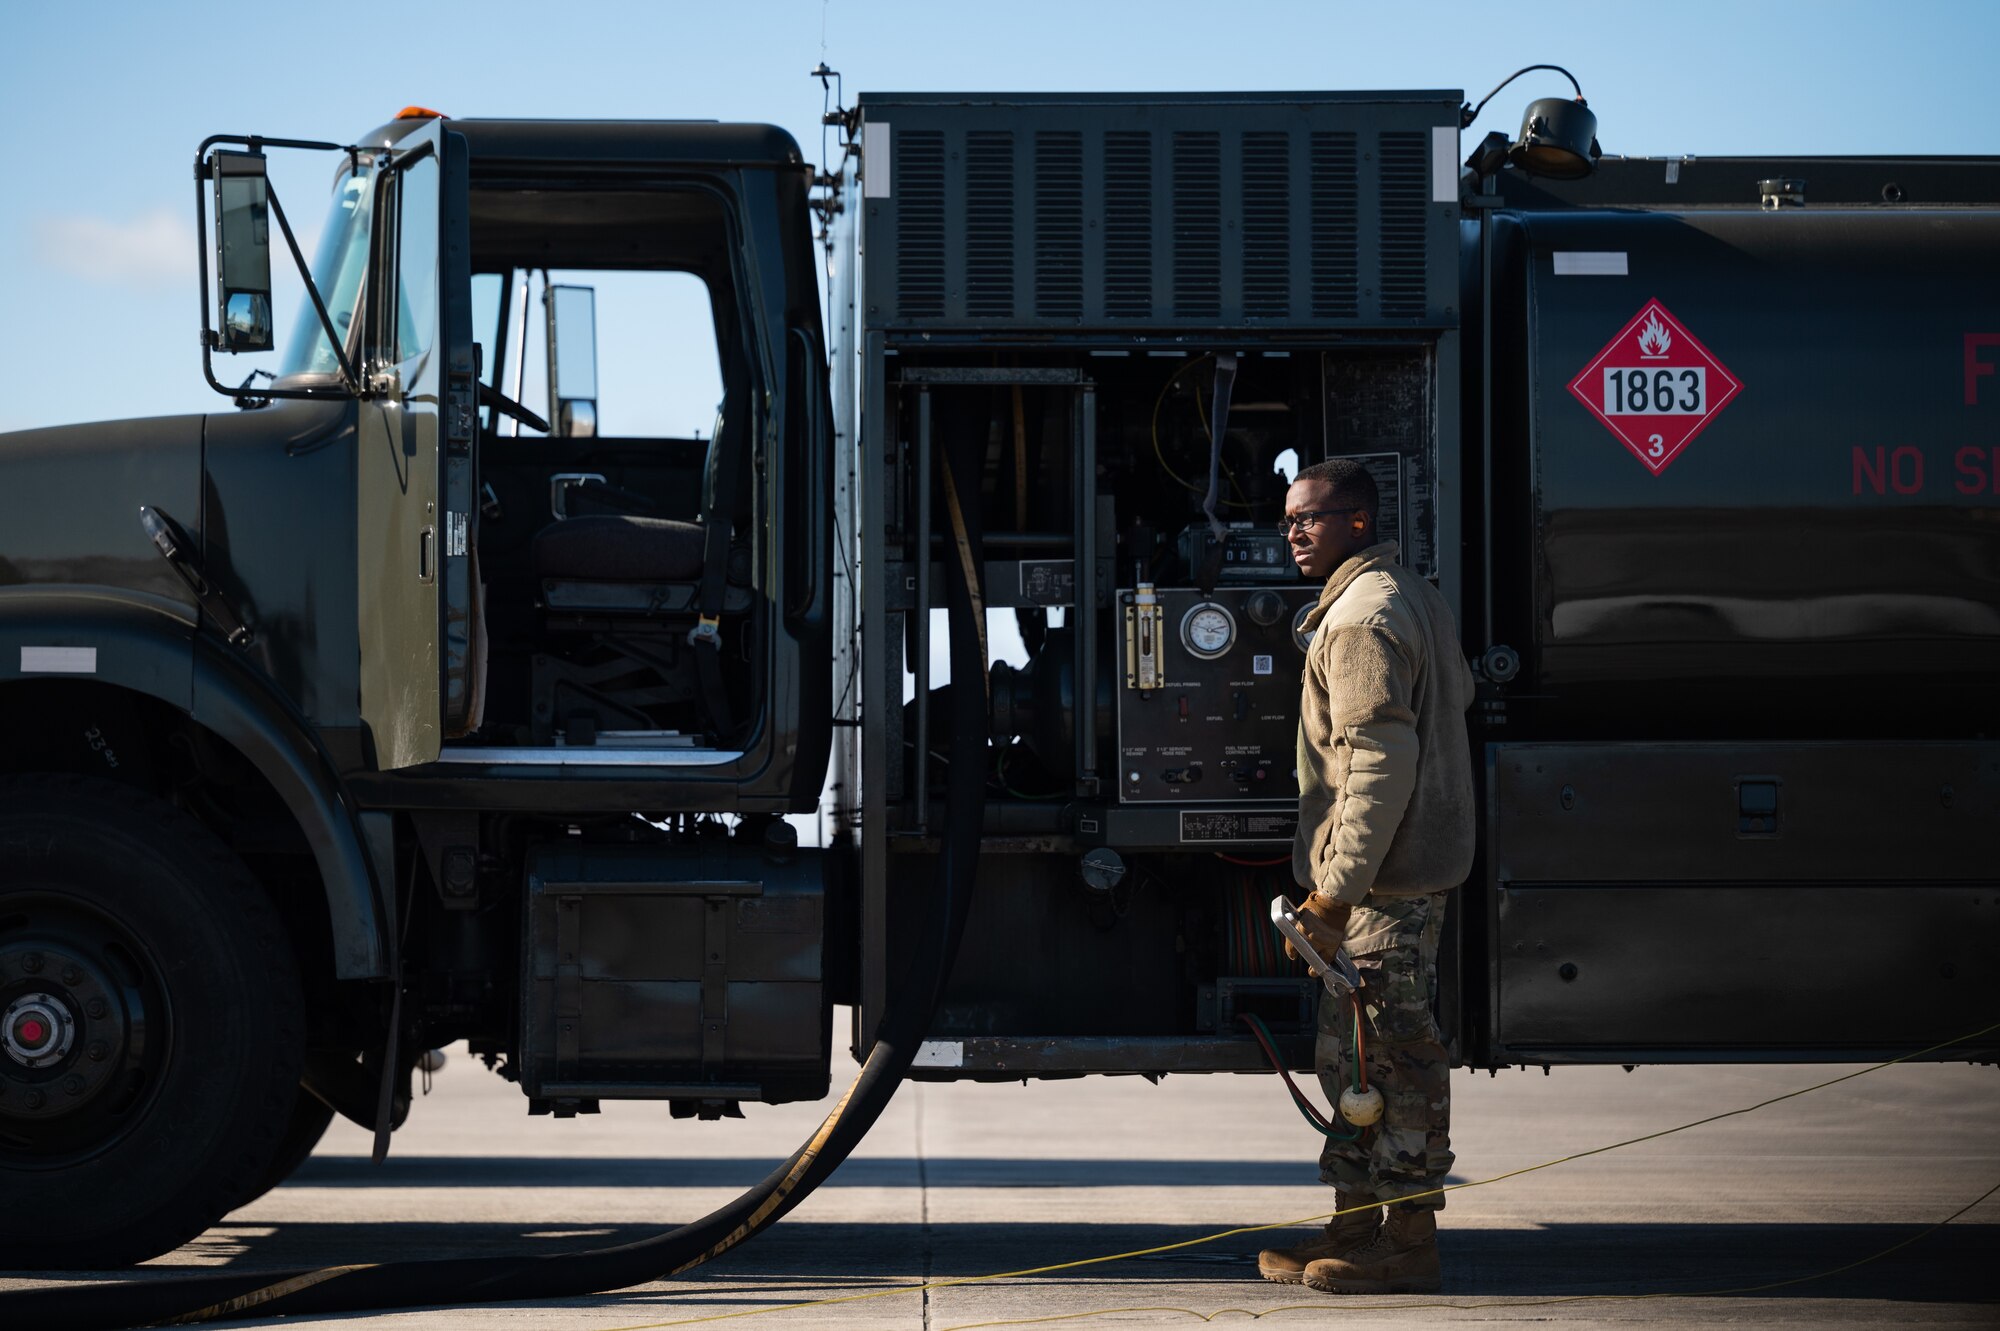 An Airman holds a tablet and stands next to a fuel truck